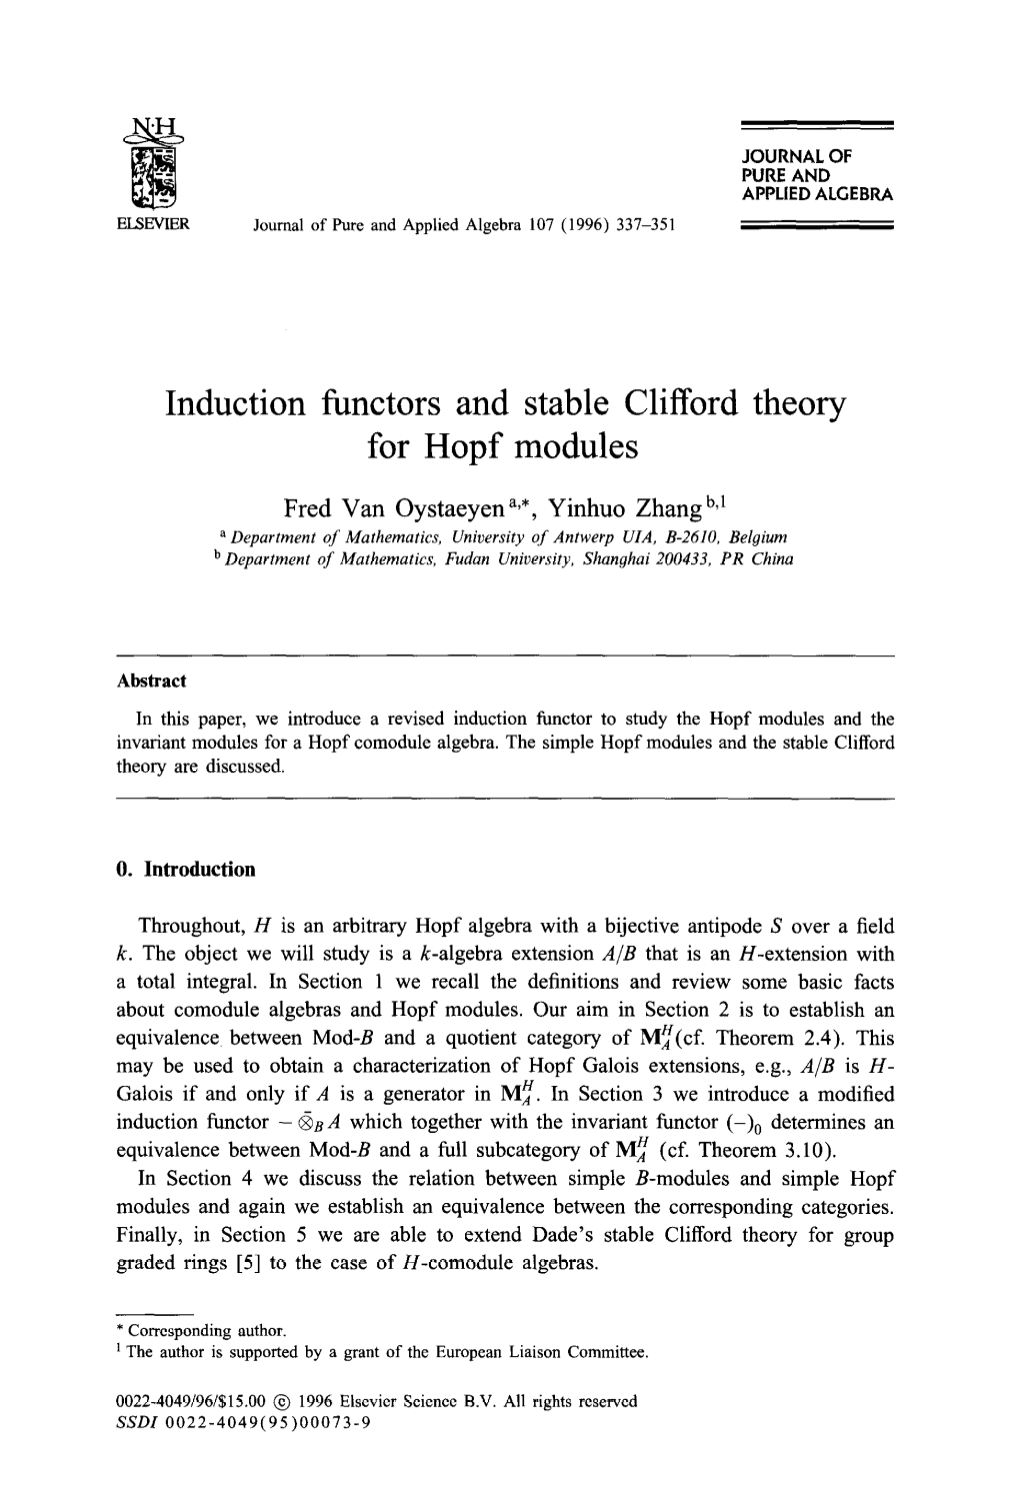 Induction Functors and Stable Clifford Theory for Hopf Modules